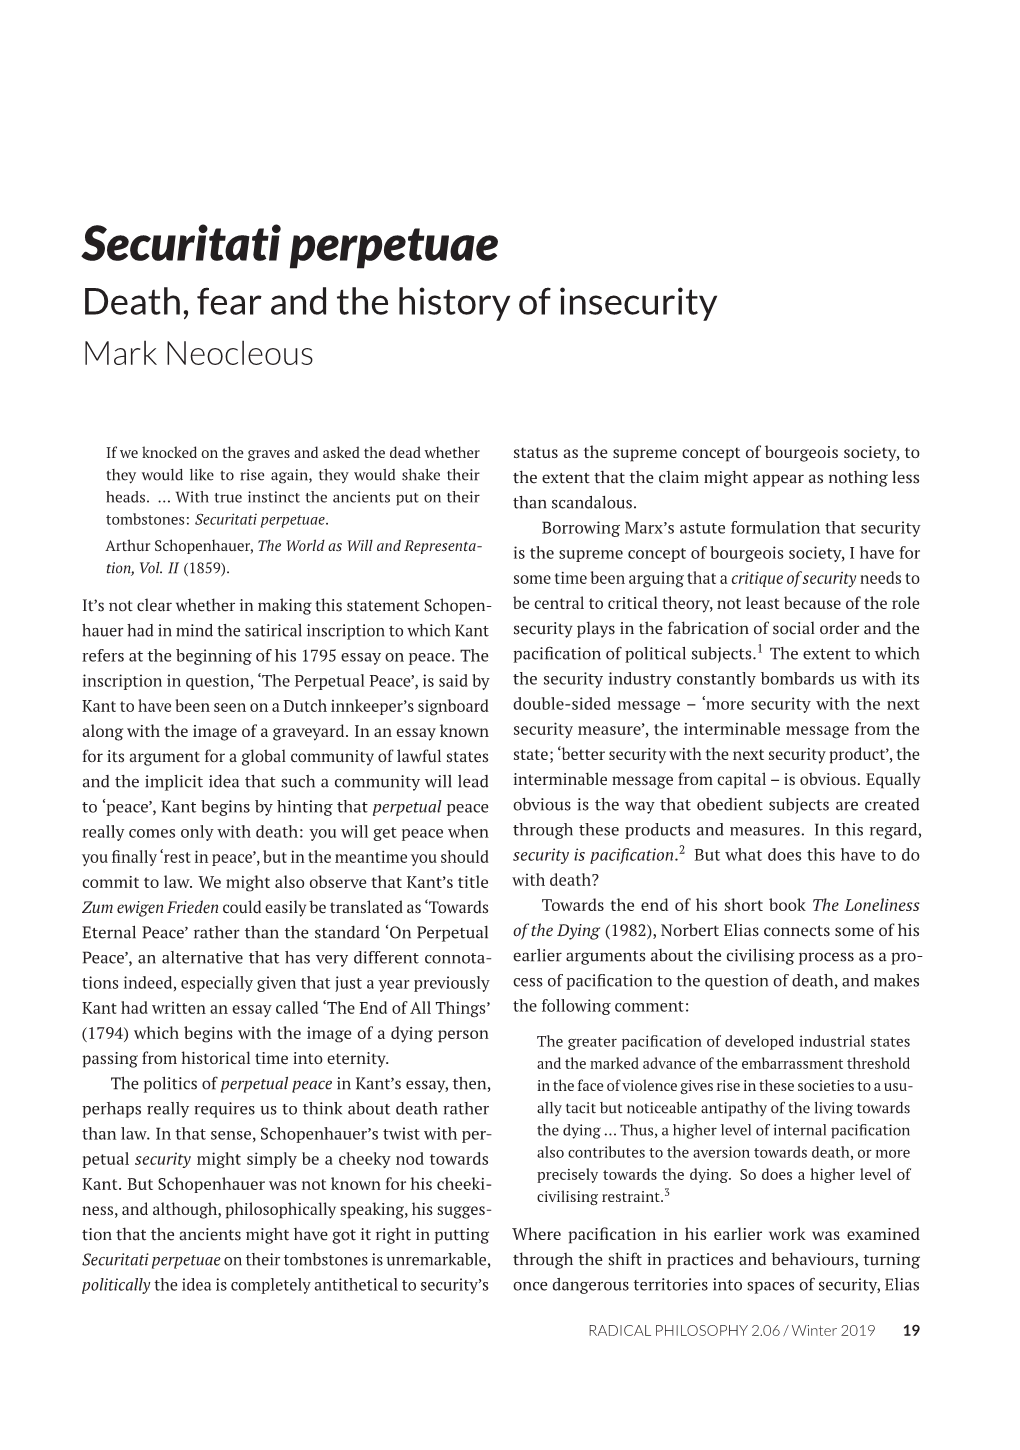 Securitati Perpetuae Death, Fear and the History of Insecurity Mark Neocleous